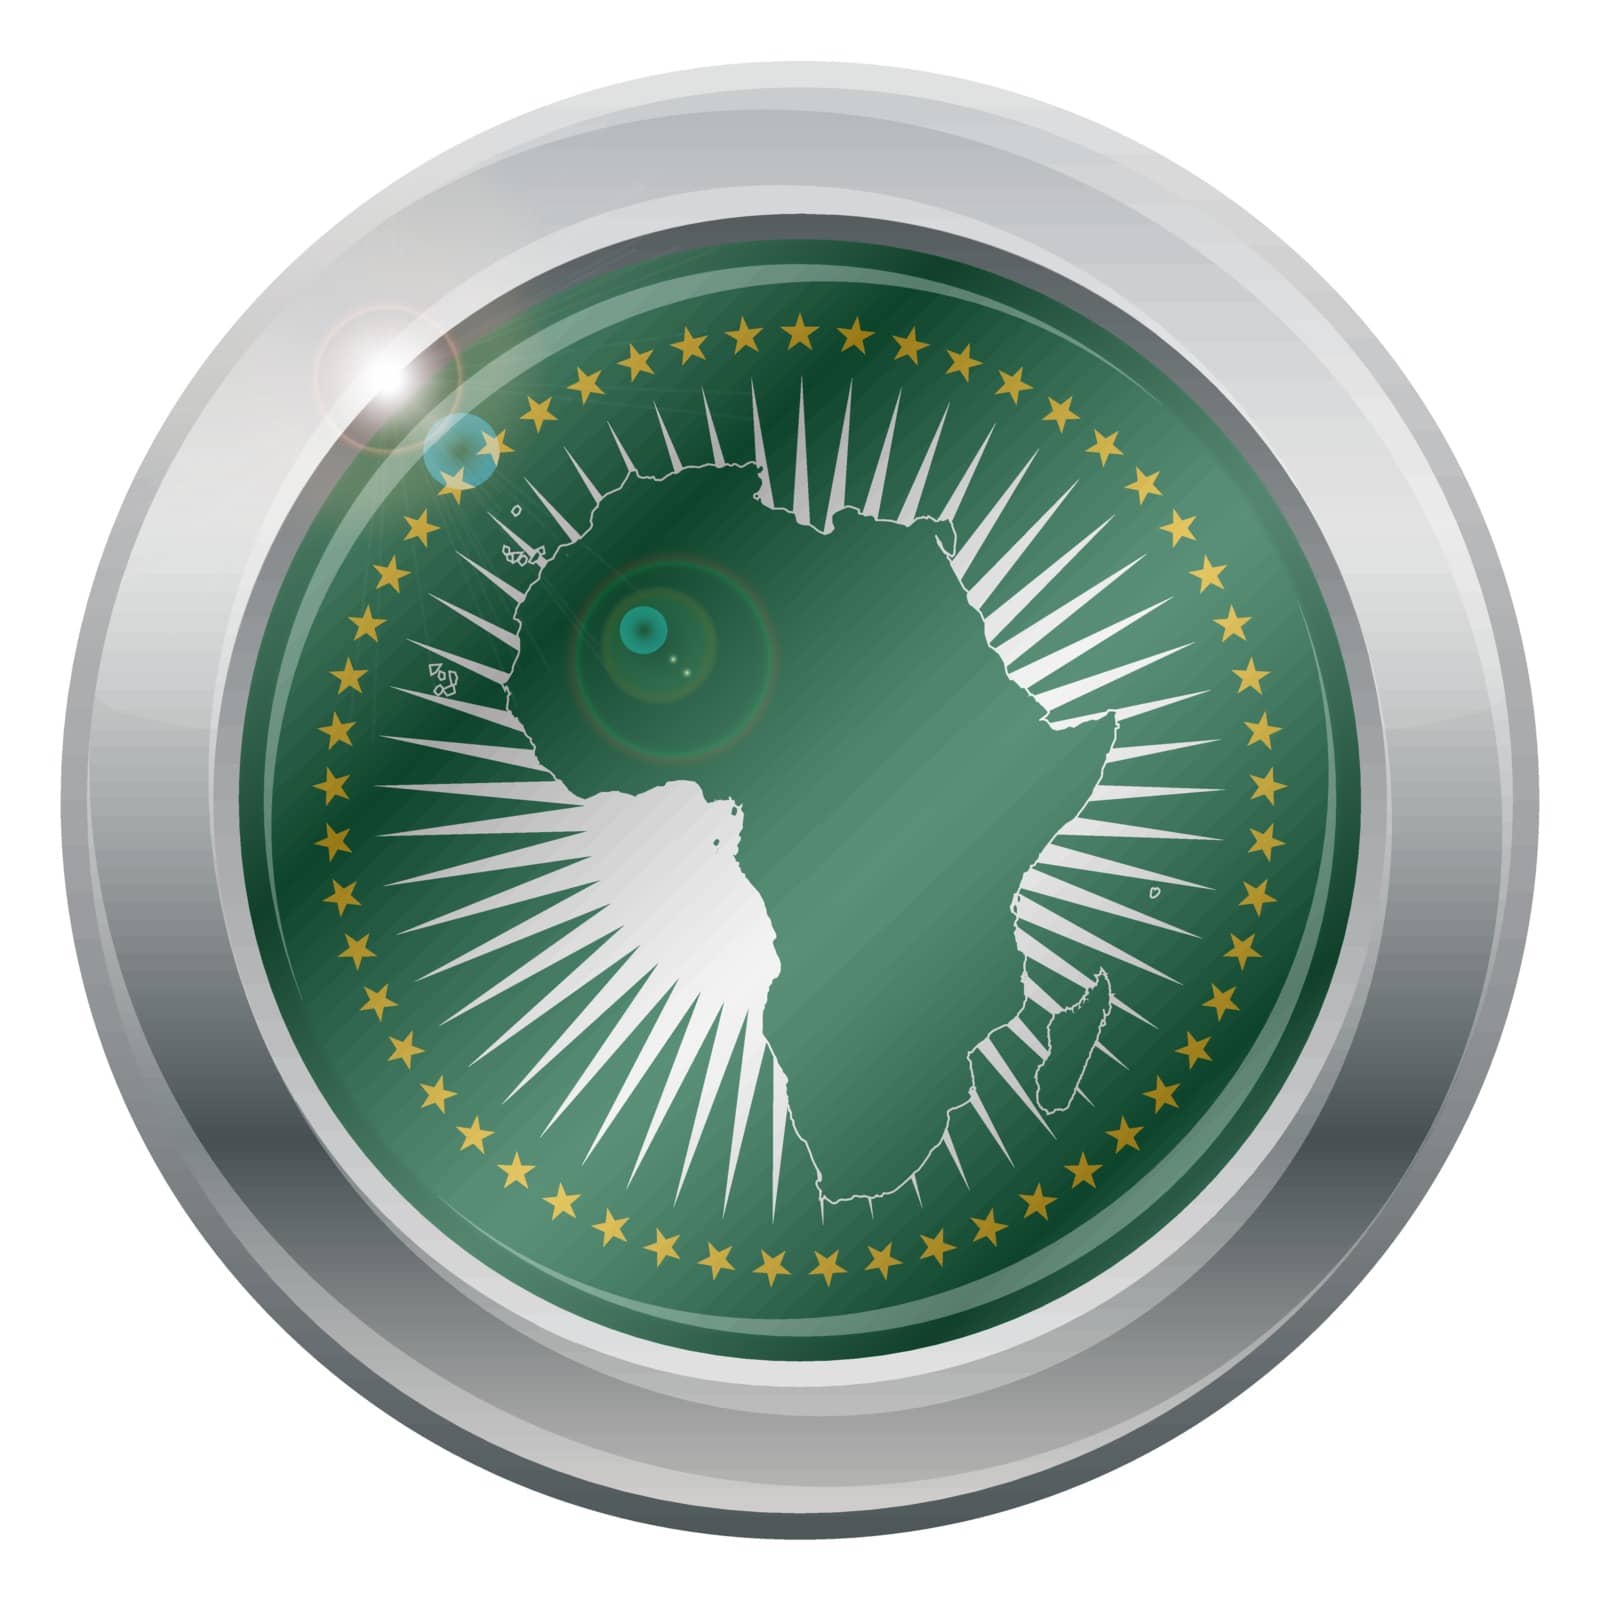 An African Union flag silver icon isolated on a white background